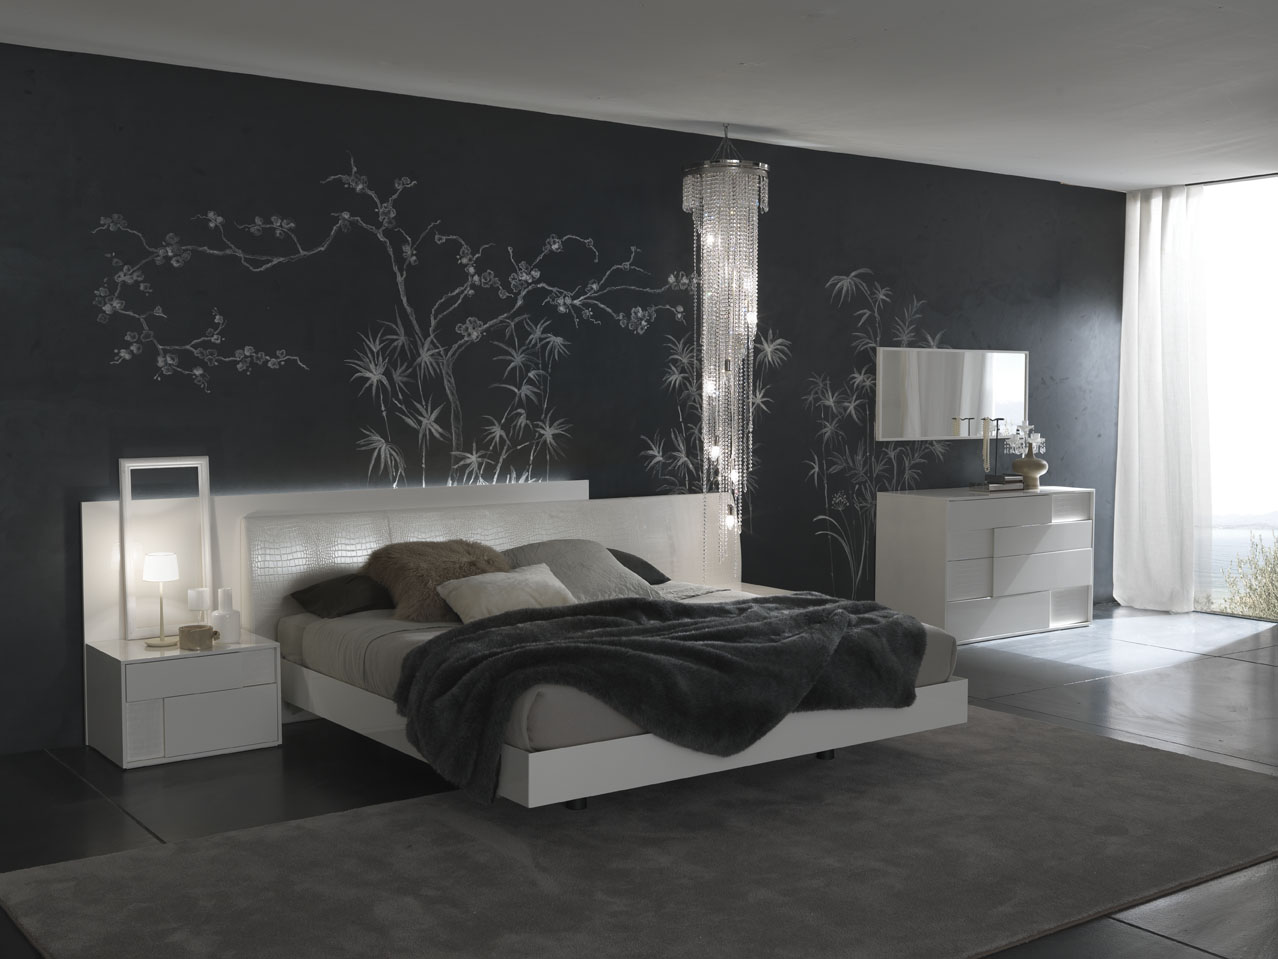 Wall Decorating Ideas For Bedroom In Video